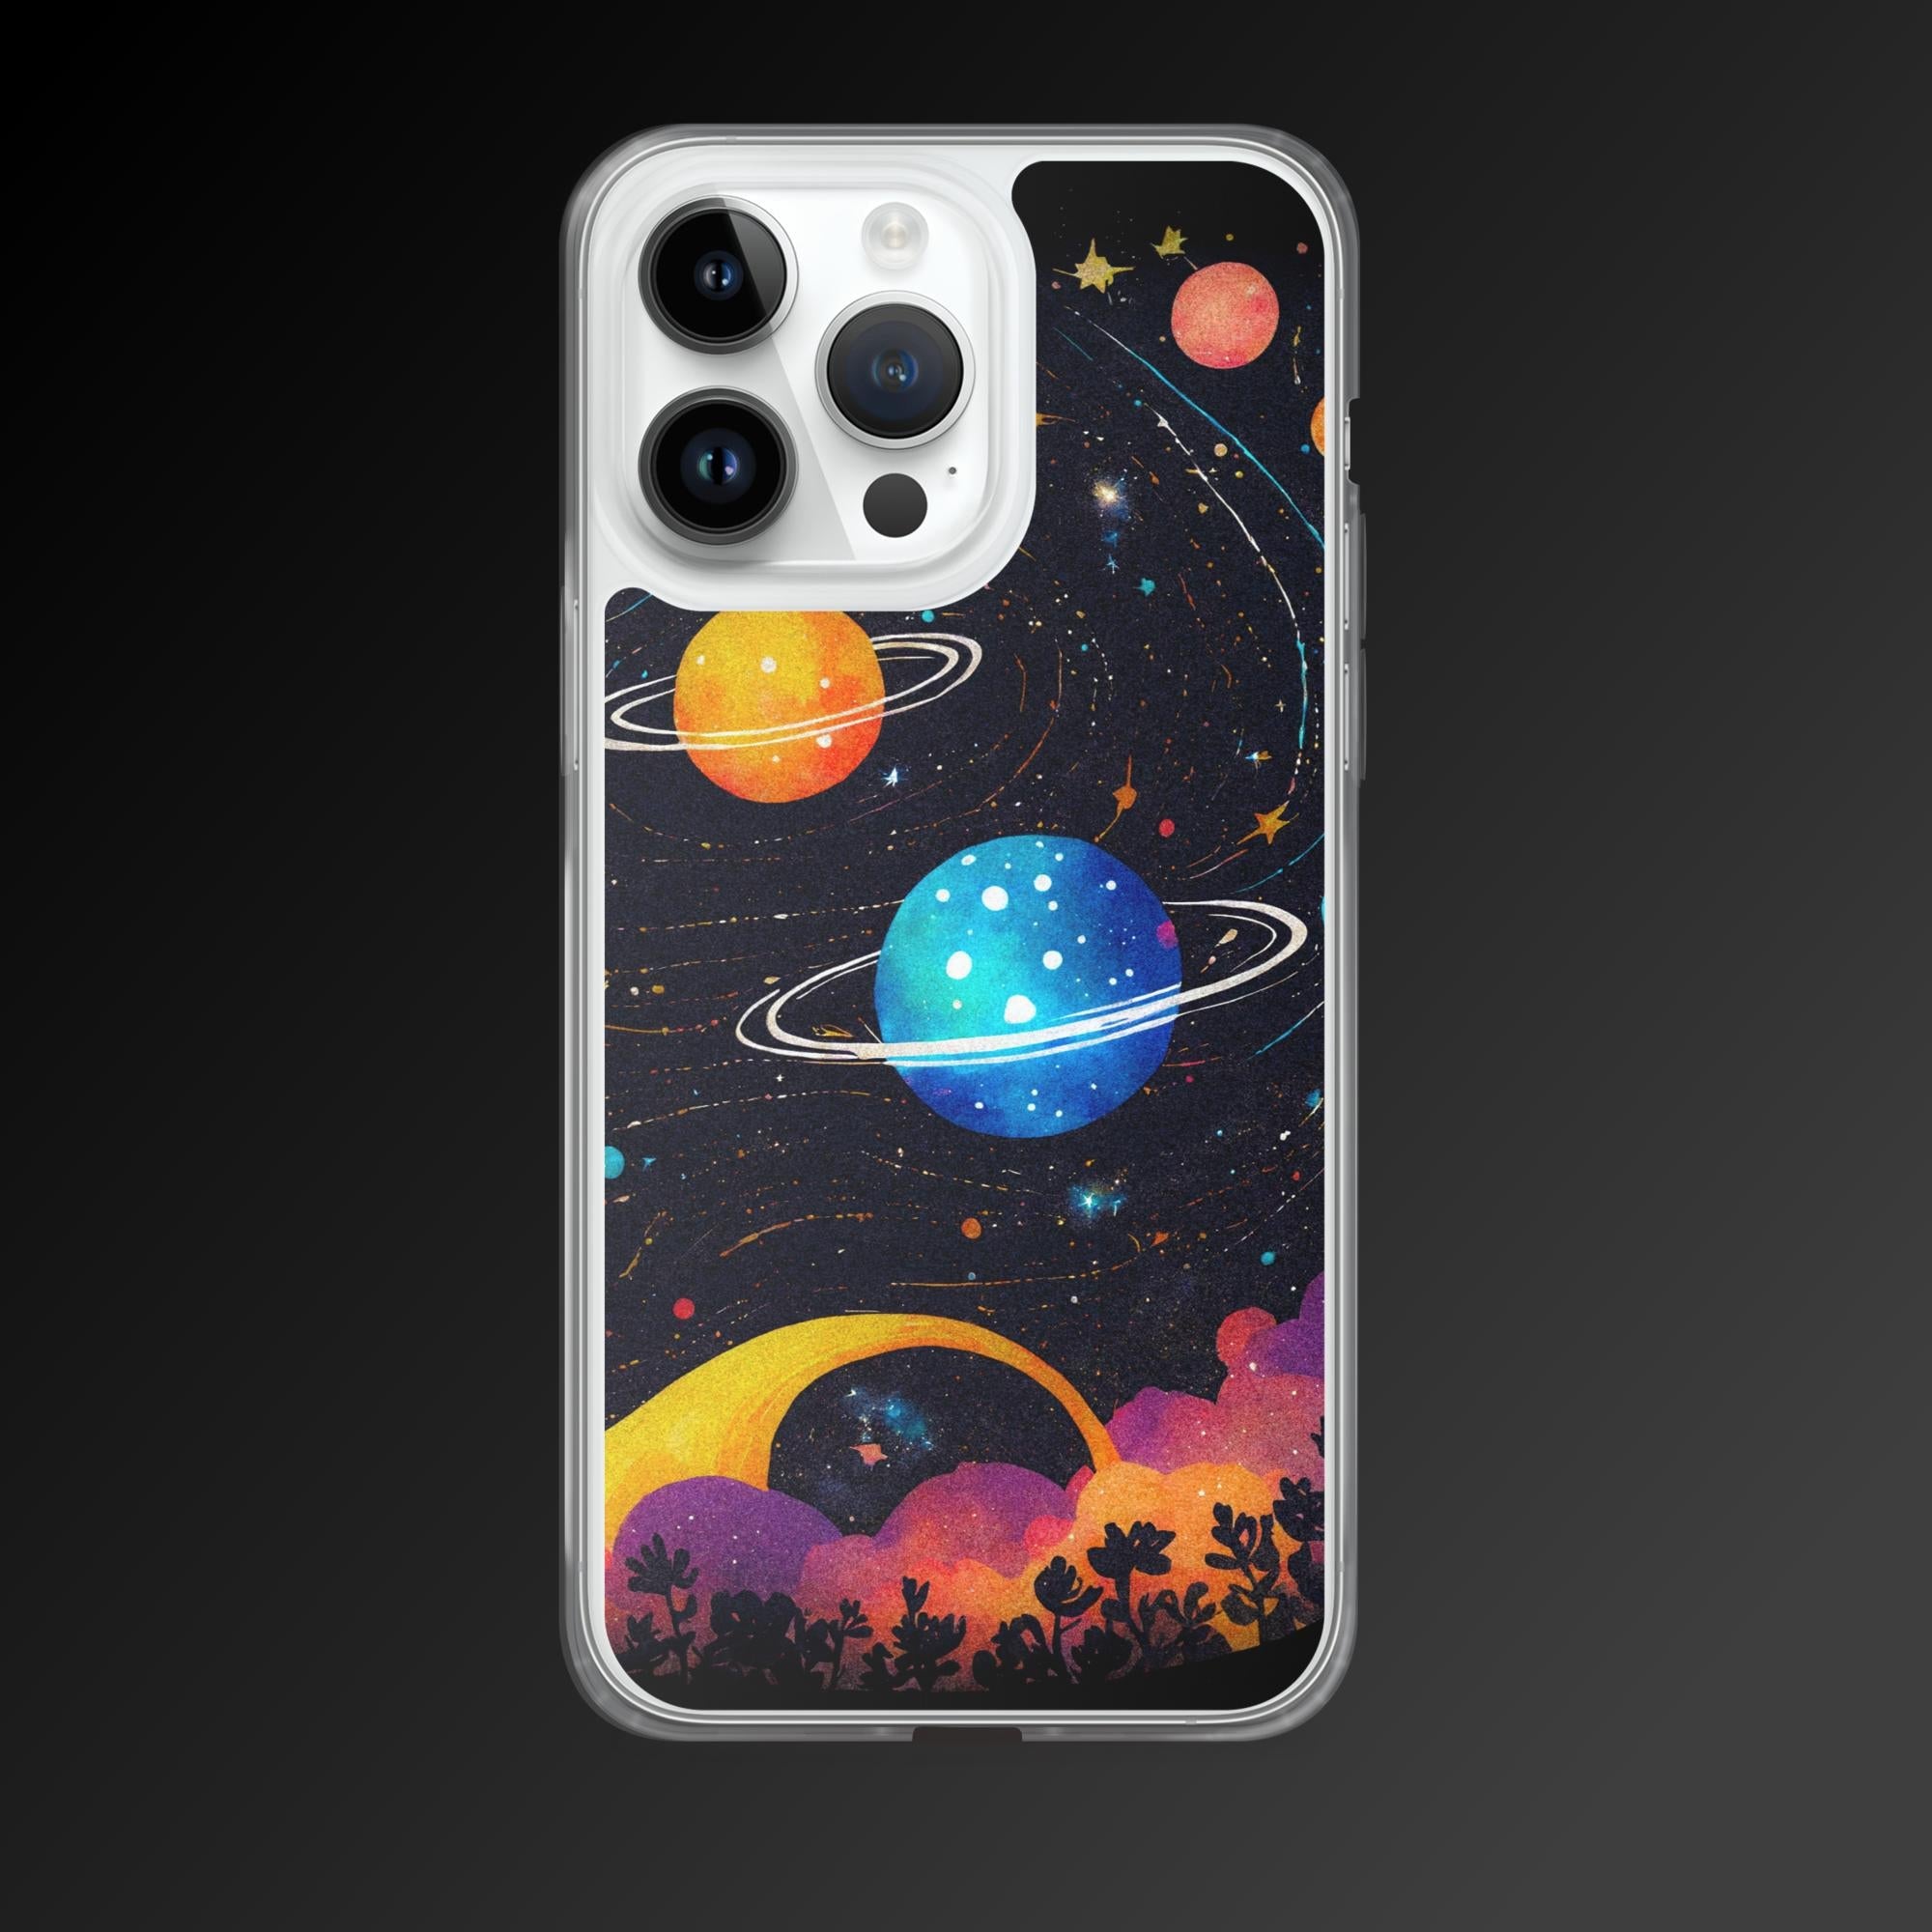 "Clear night" clear iphone case - Clear iphone case - Ever colorful